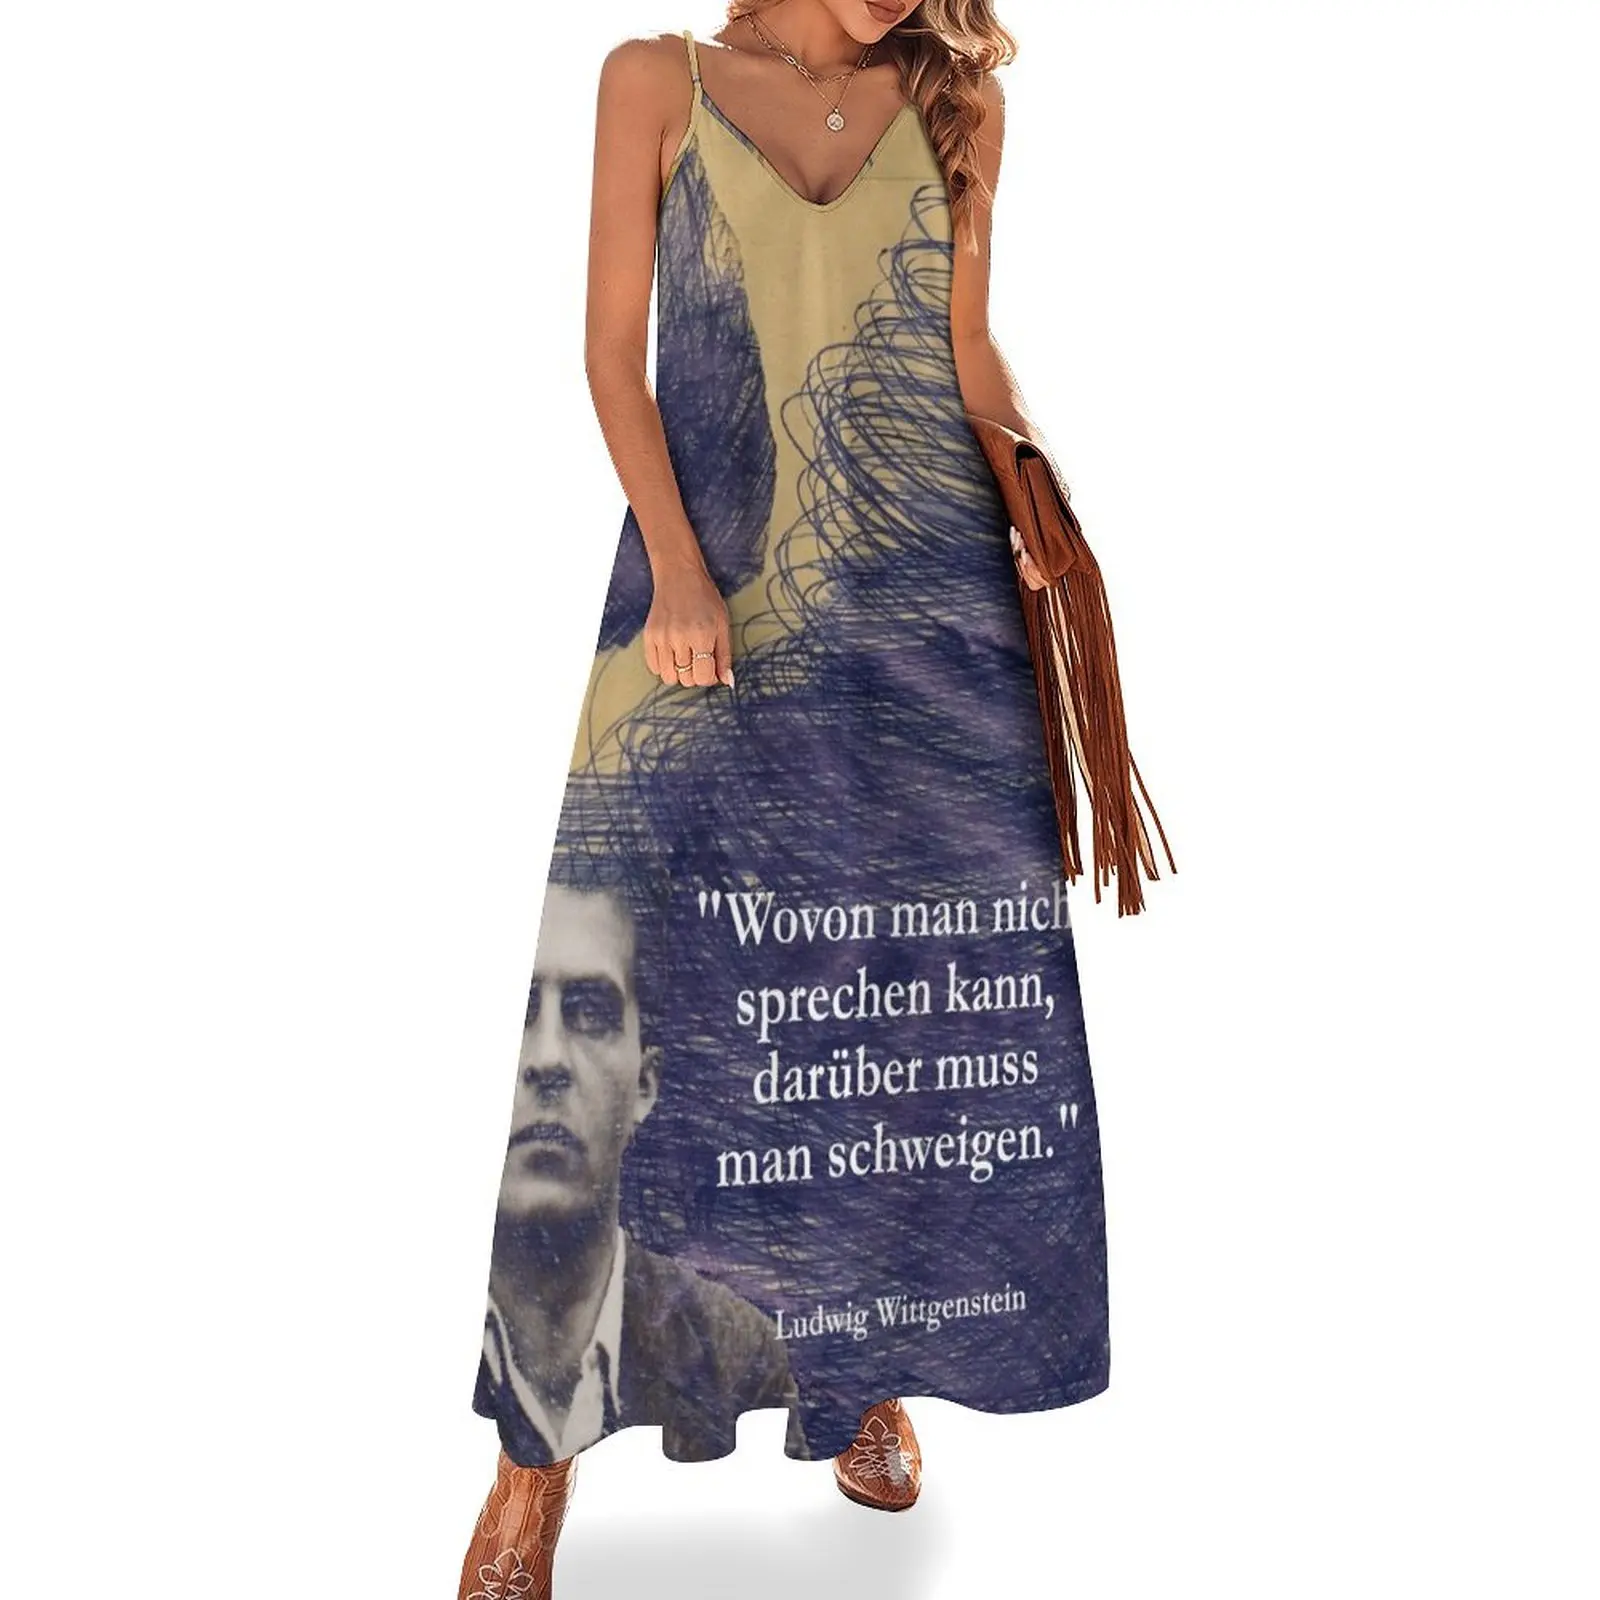 

Ludwig Wittgenstein quote, about which one cannot speak, one must remain silent about it Sleeveless Dress Women's summer dresses